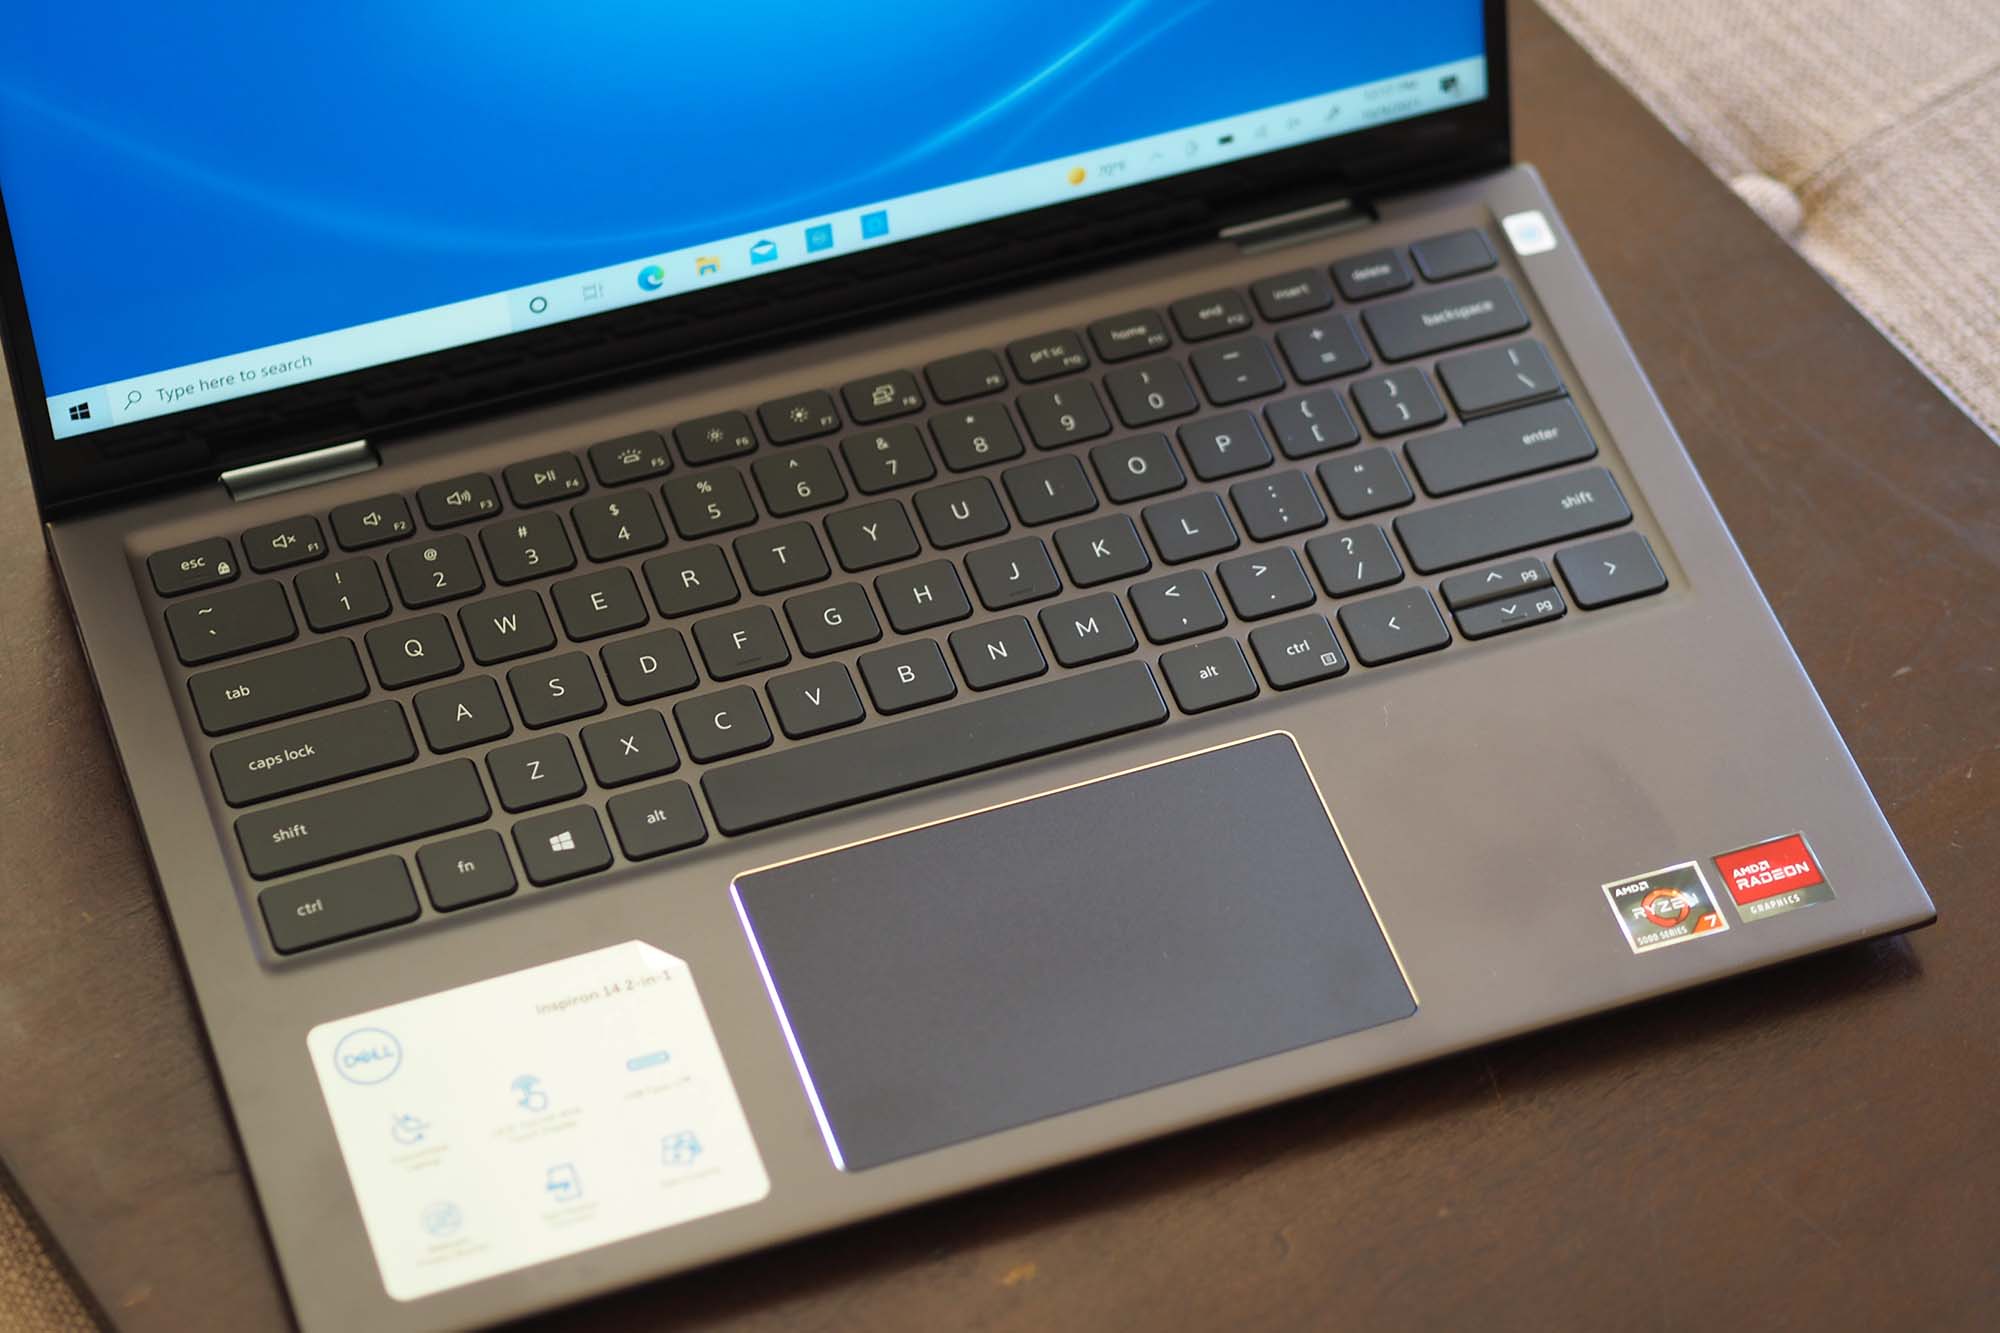 Dell Inspiron 14 2-in-1 Review: Sad Display